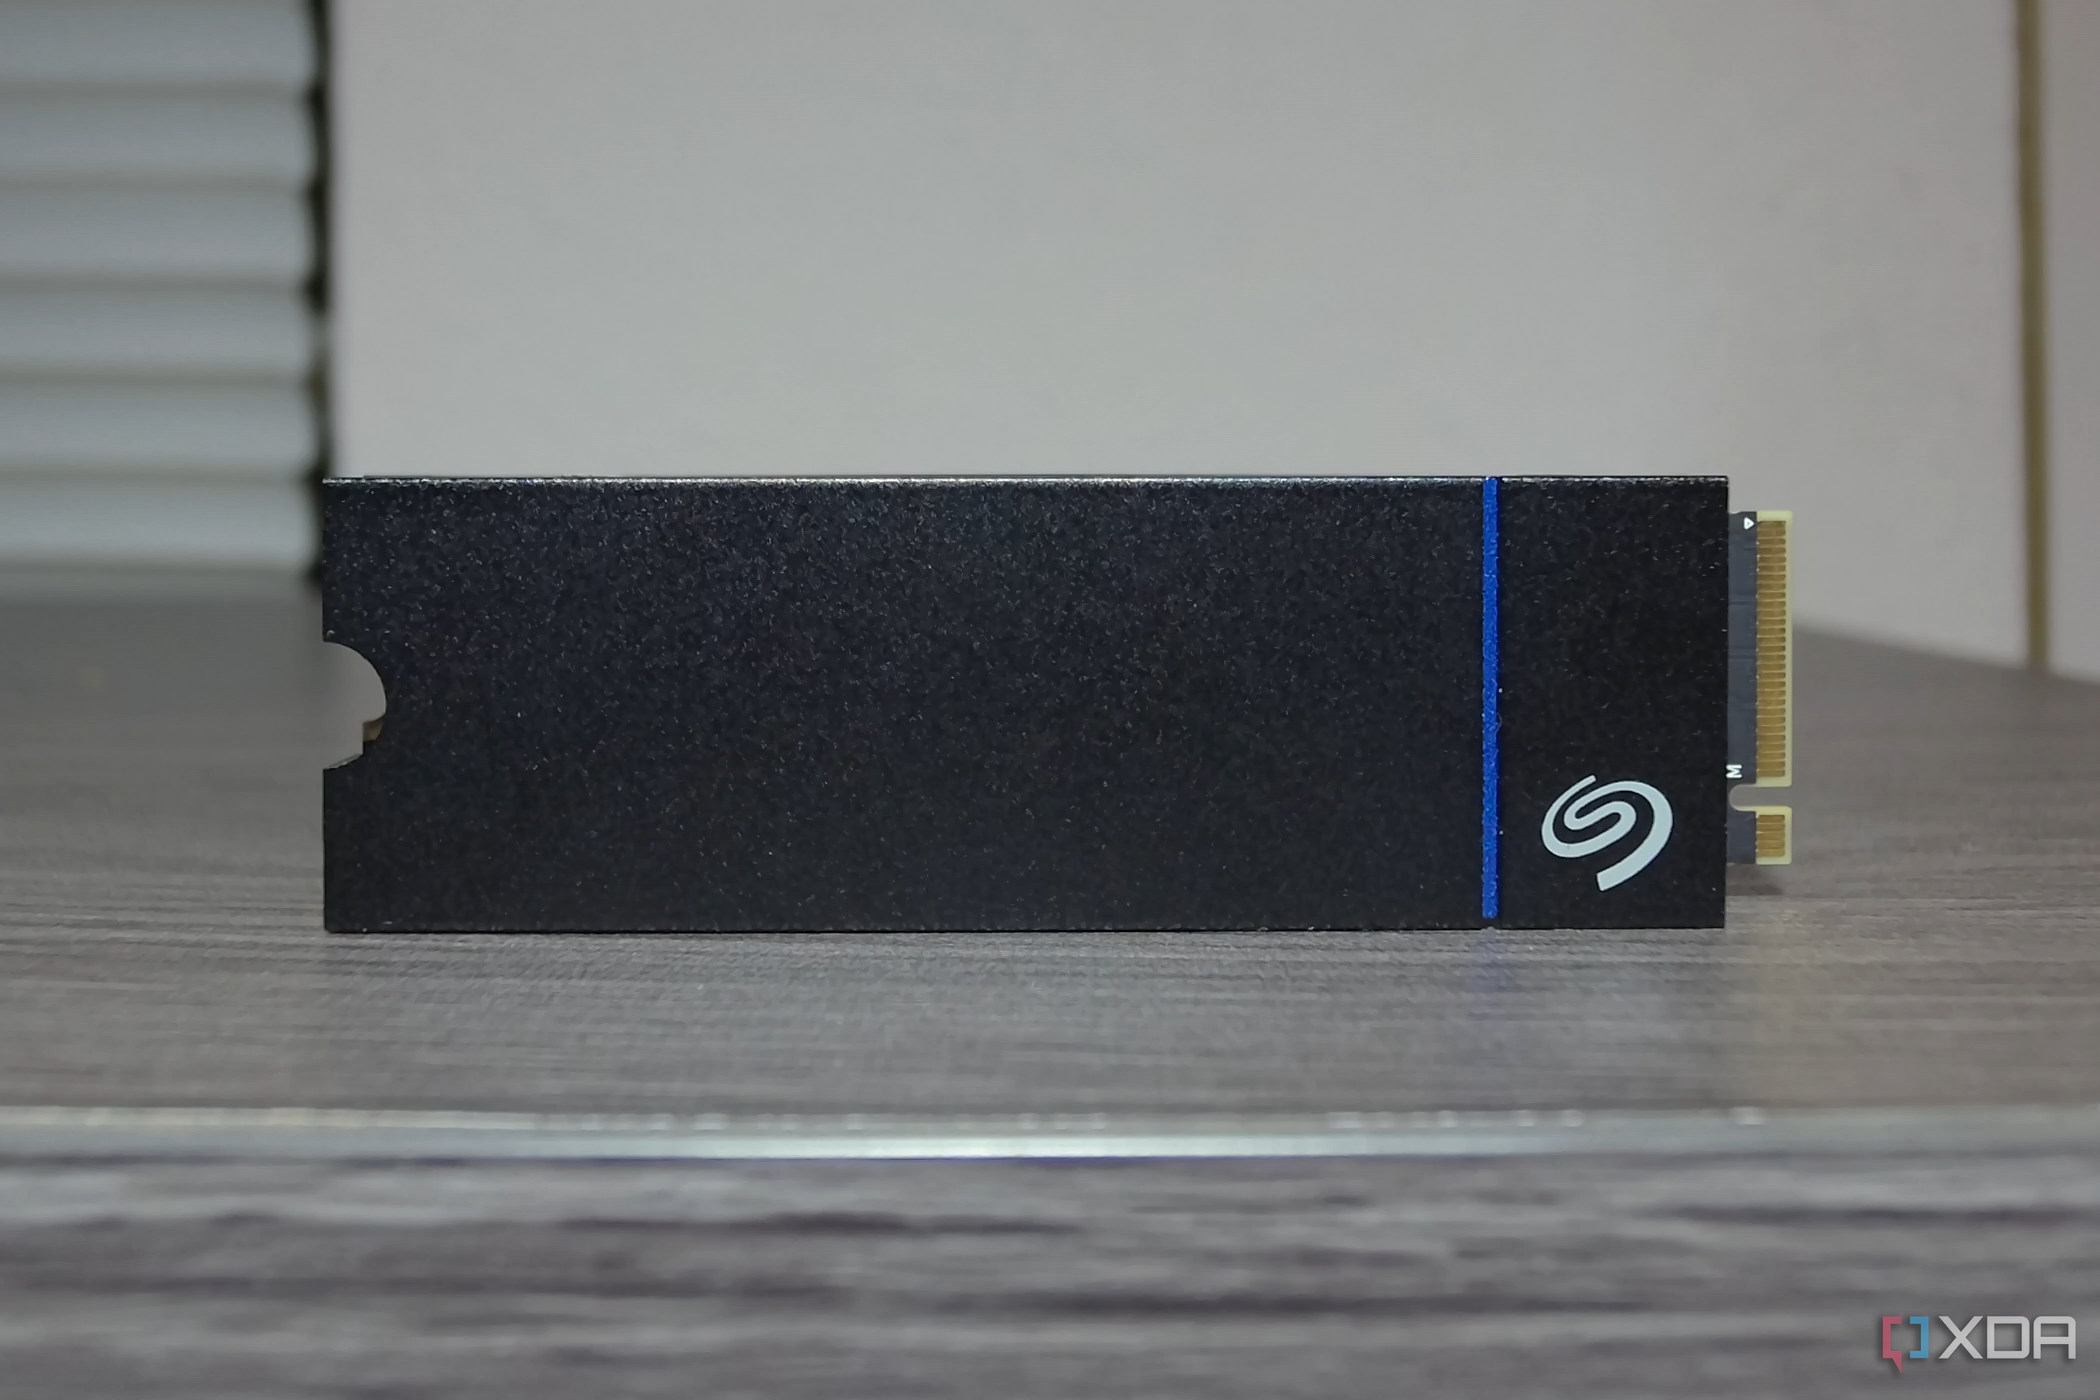 Seagate External SSD PS5 Hard Drive White Edition review: The best